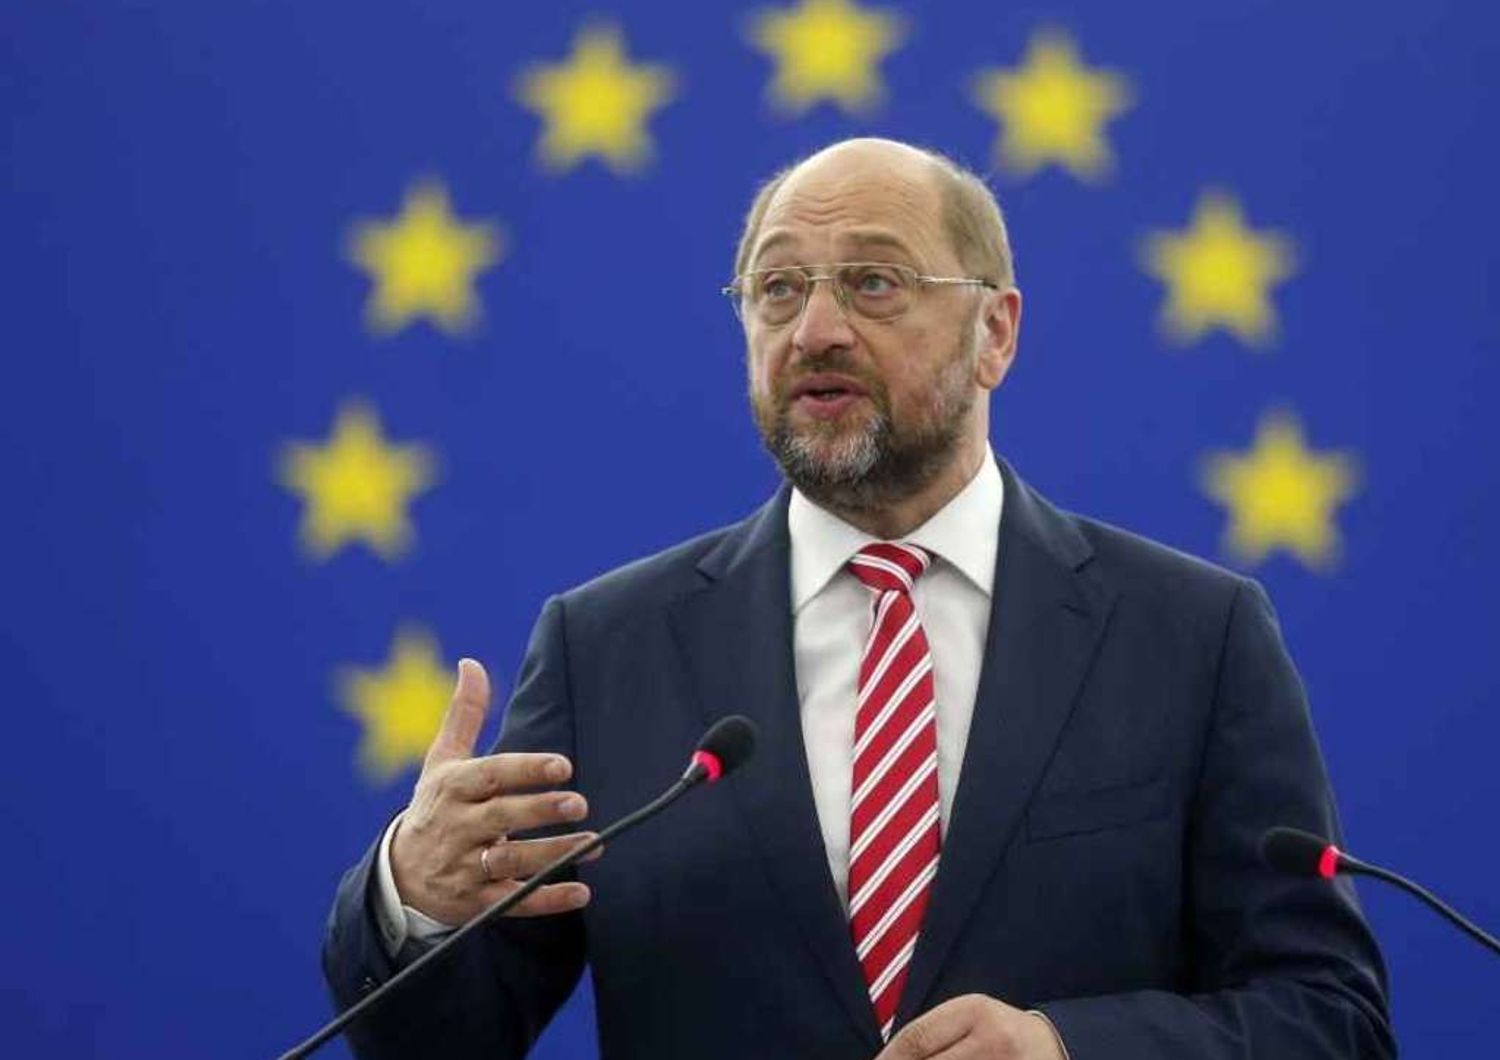 Schulz re-elected president of European Parliament